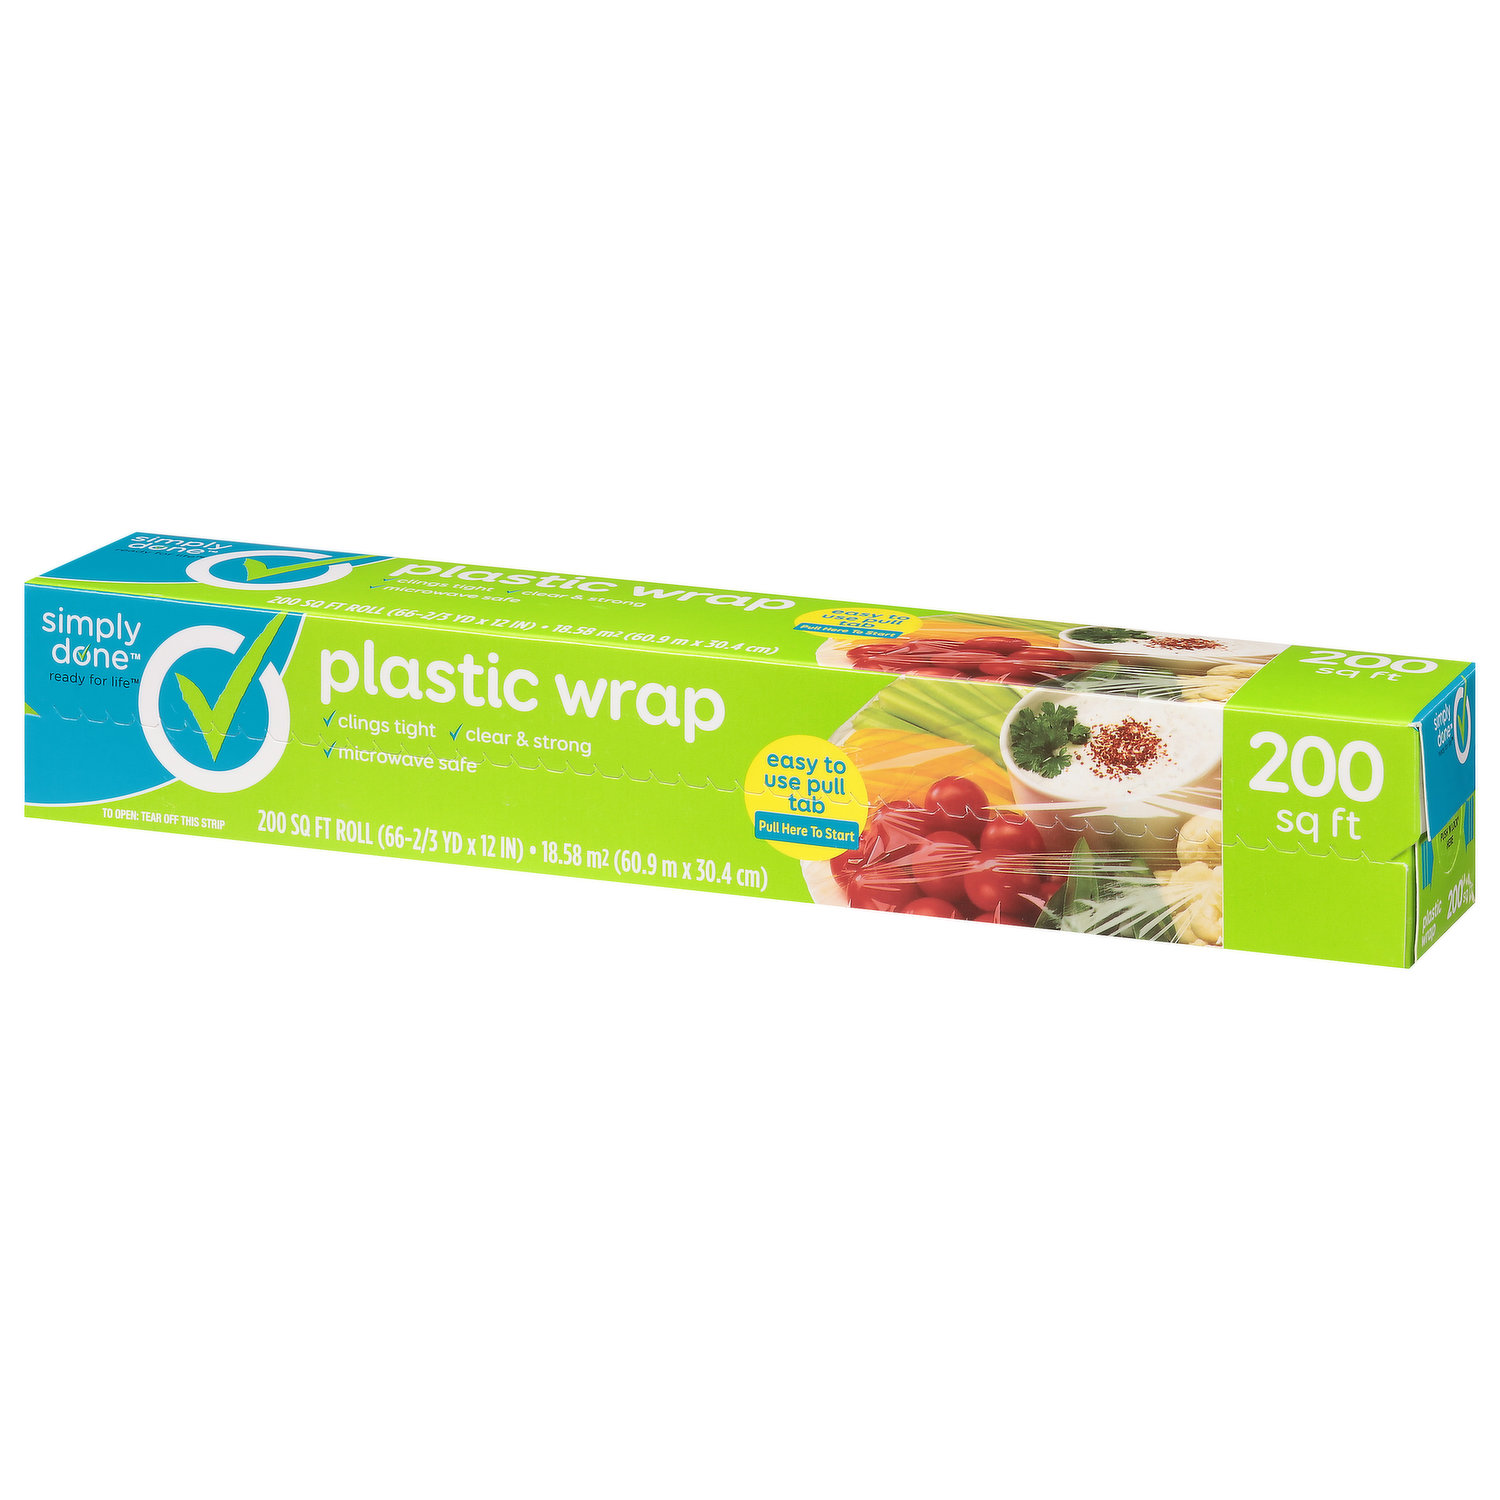 Simply Done Plastic Wrap, Professional Strength, Slide Cutter